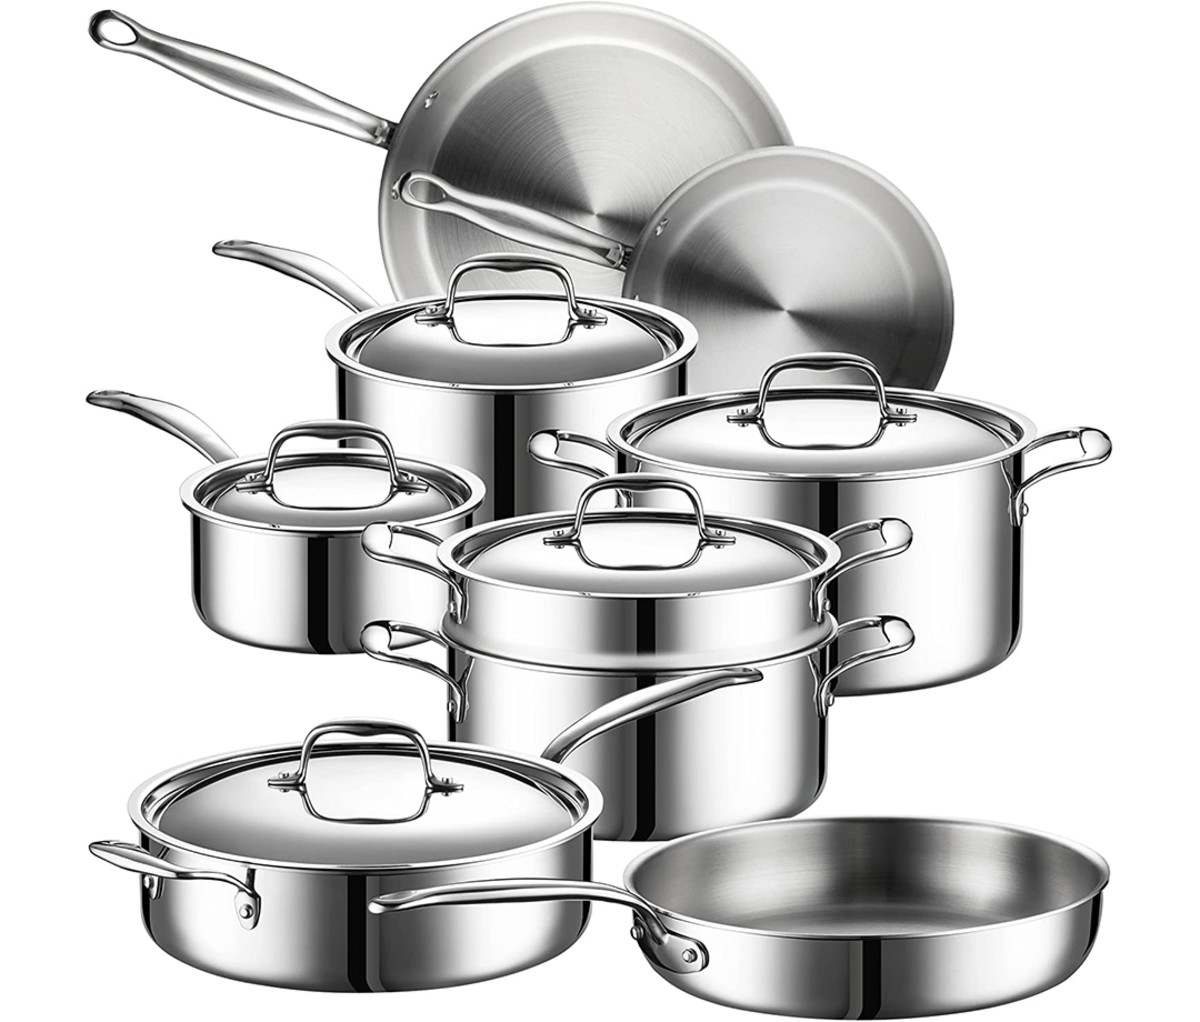 Legend 5-Ply Stainless Steel Cookware Set